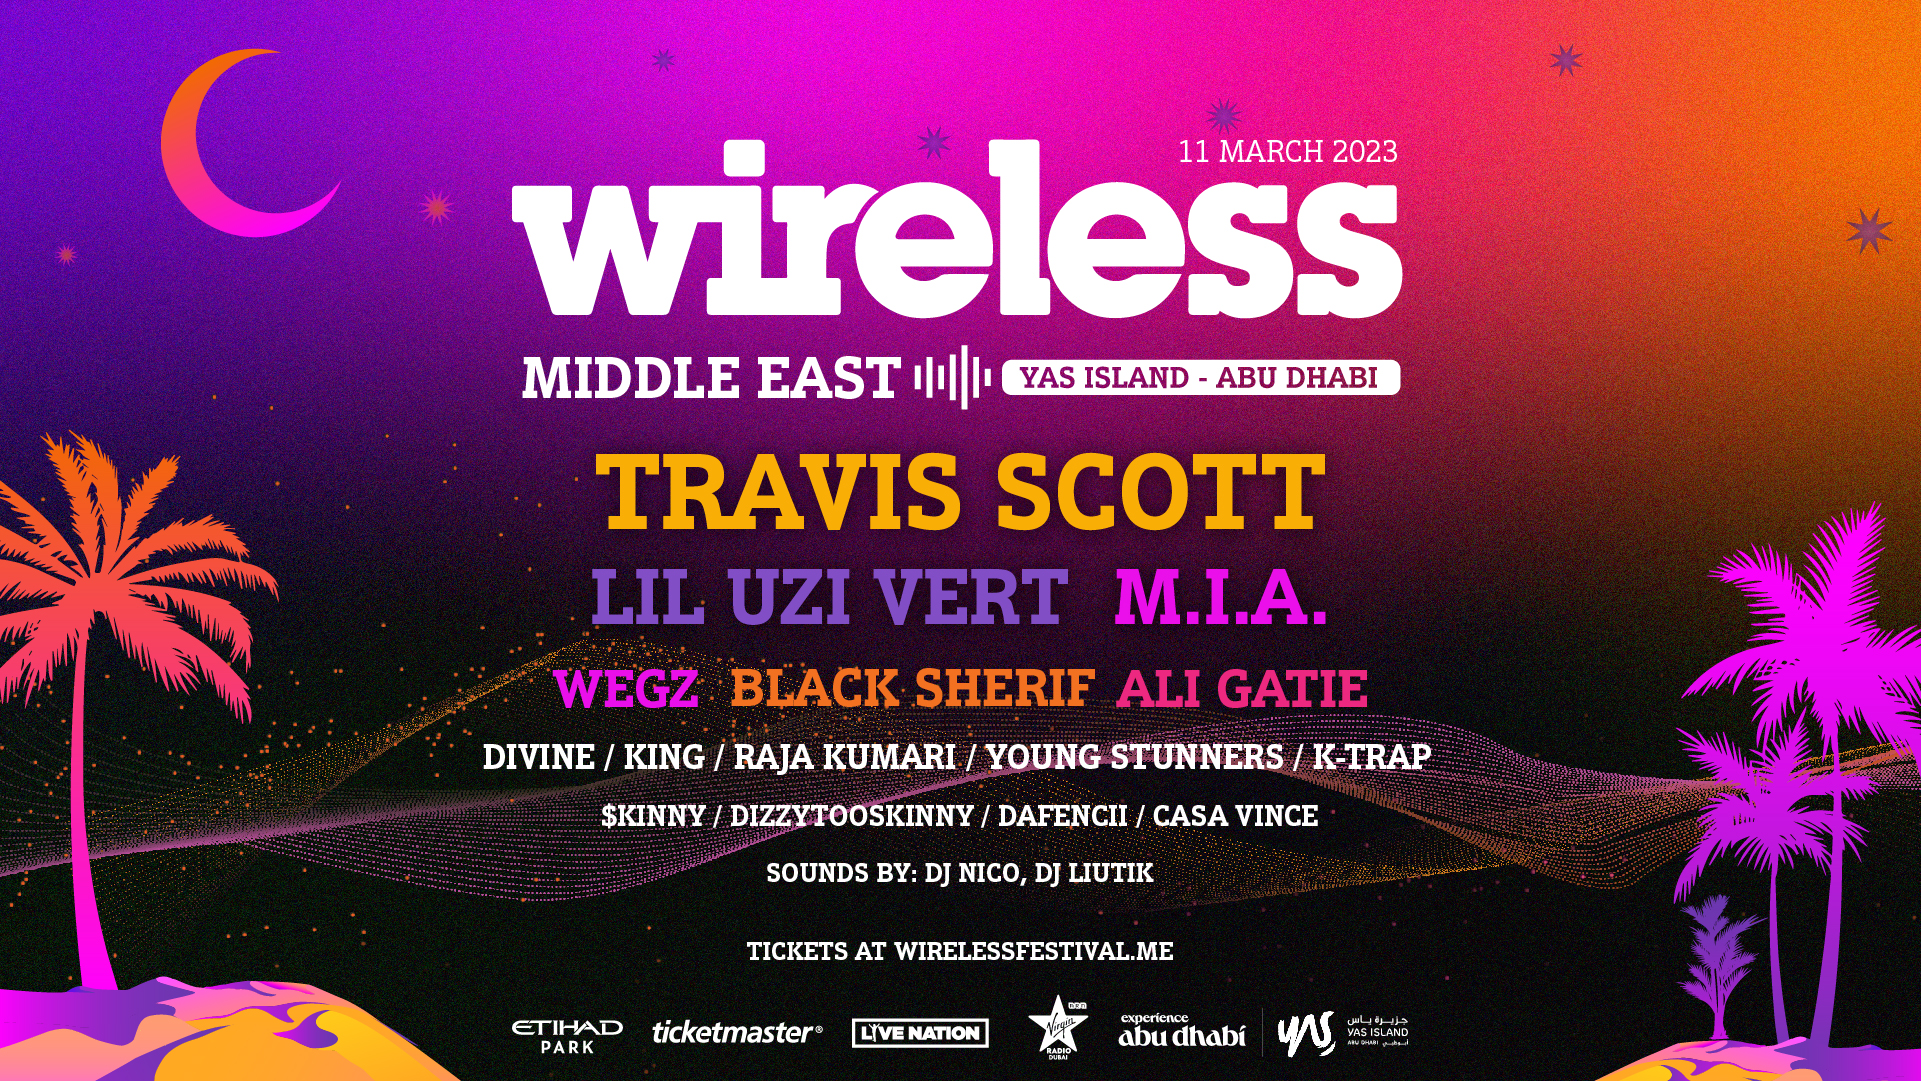 Presented By Live Nation: M.I.A. Confirmed As Latest Headliner For The Incredible Wireless Festival